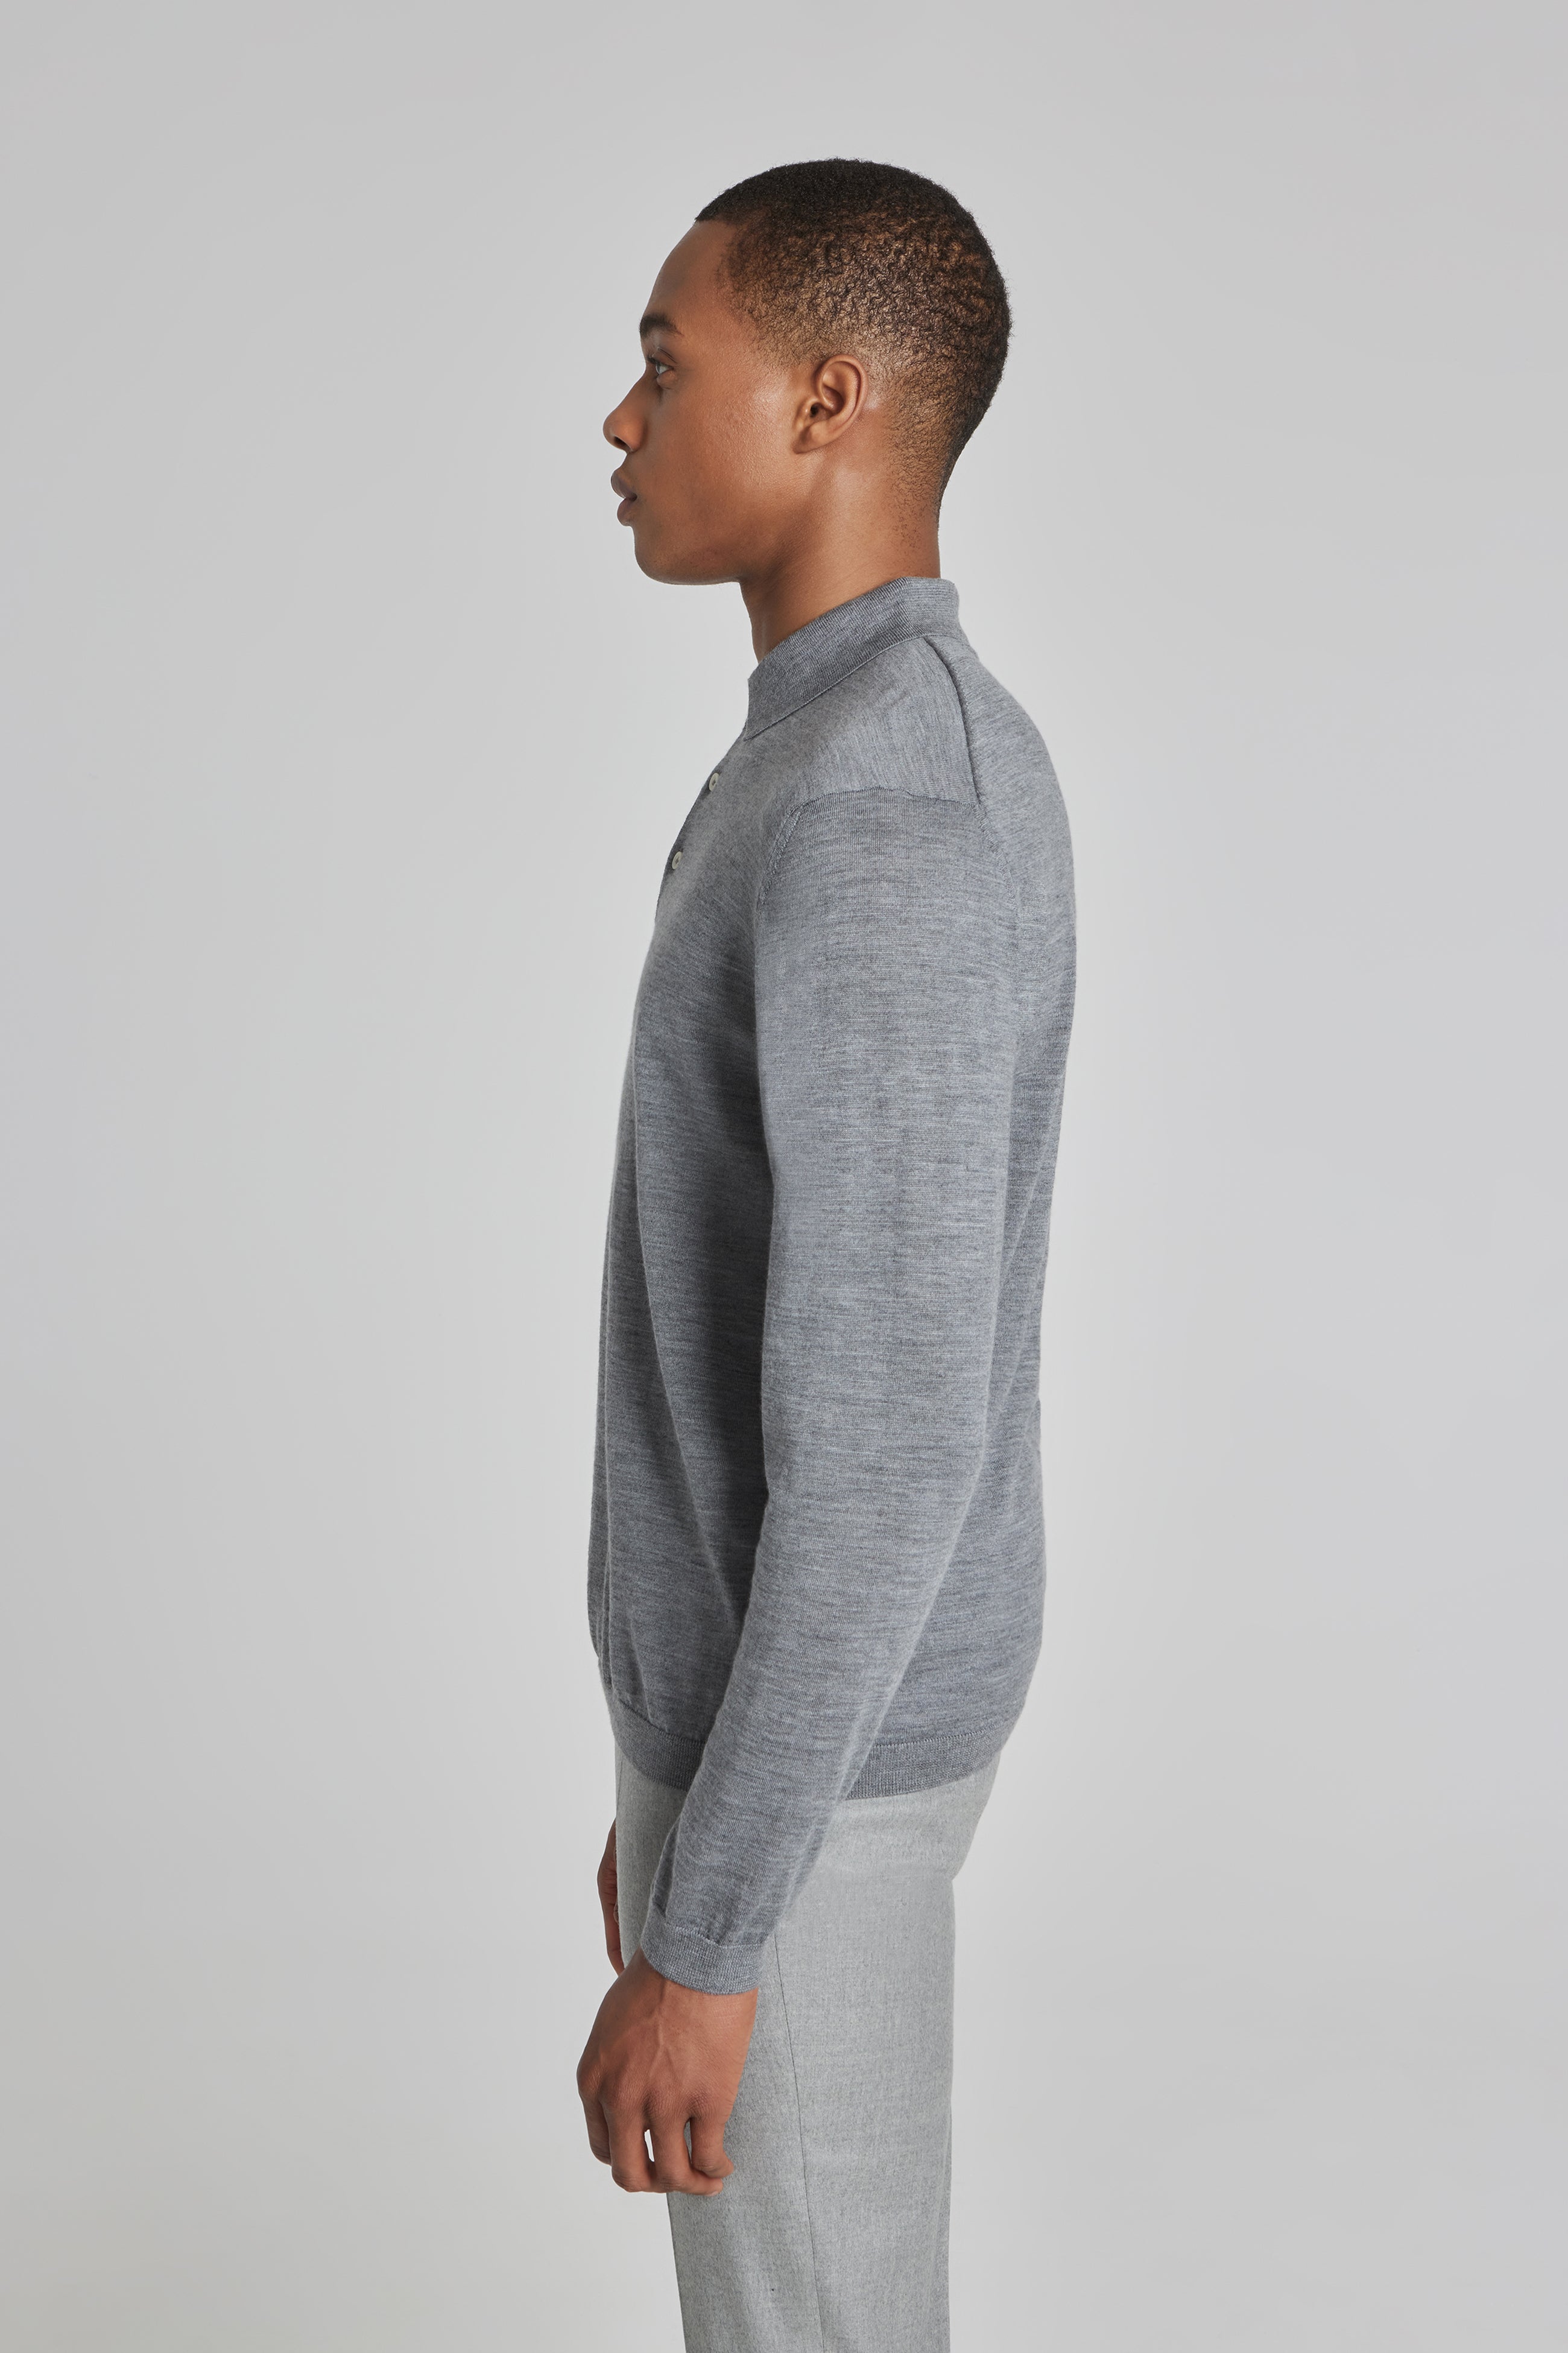 Image of Redfern Grey Wool, Silk and Cashmere Long Sleeve Polo-Jack Victor